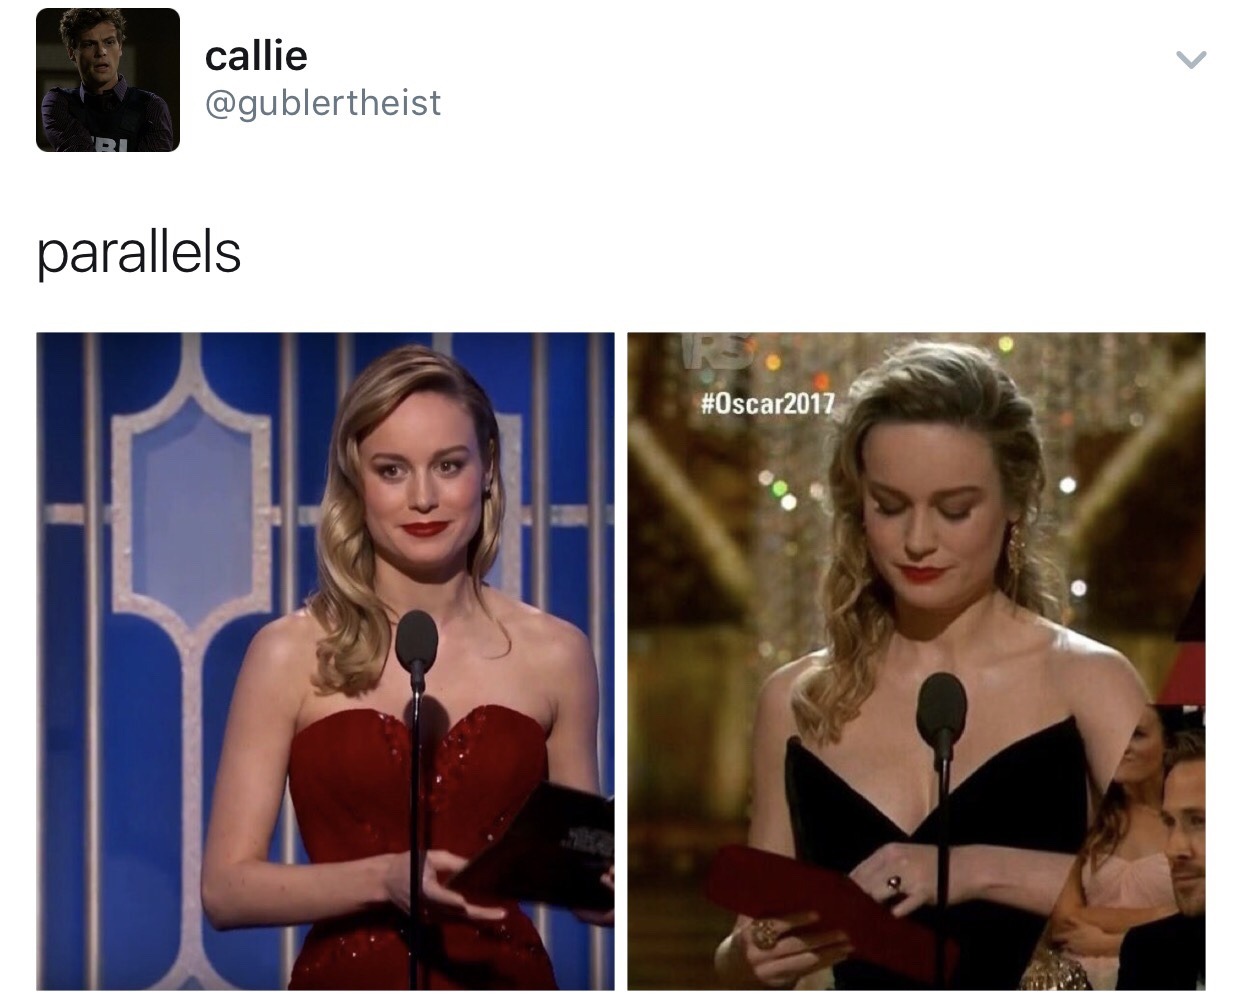 bob-belcher:
“Brie Larson the first and second time she’s presented an award Casey Affleck has won.
”